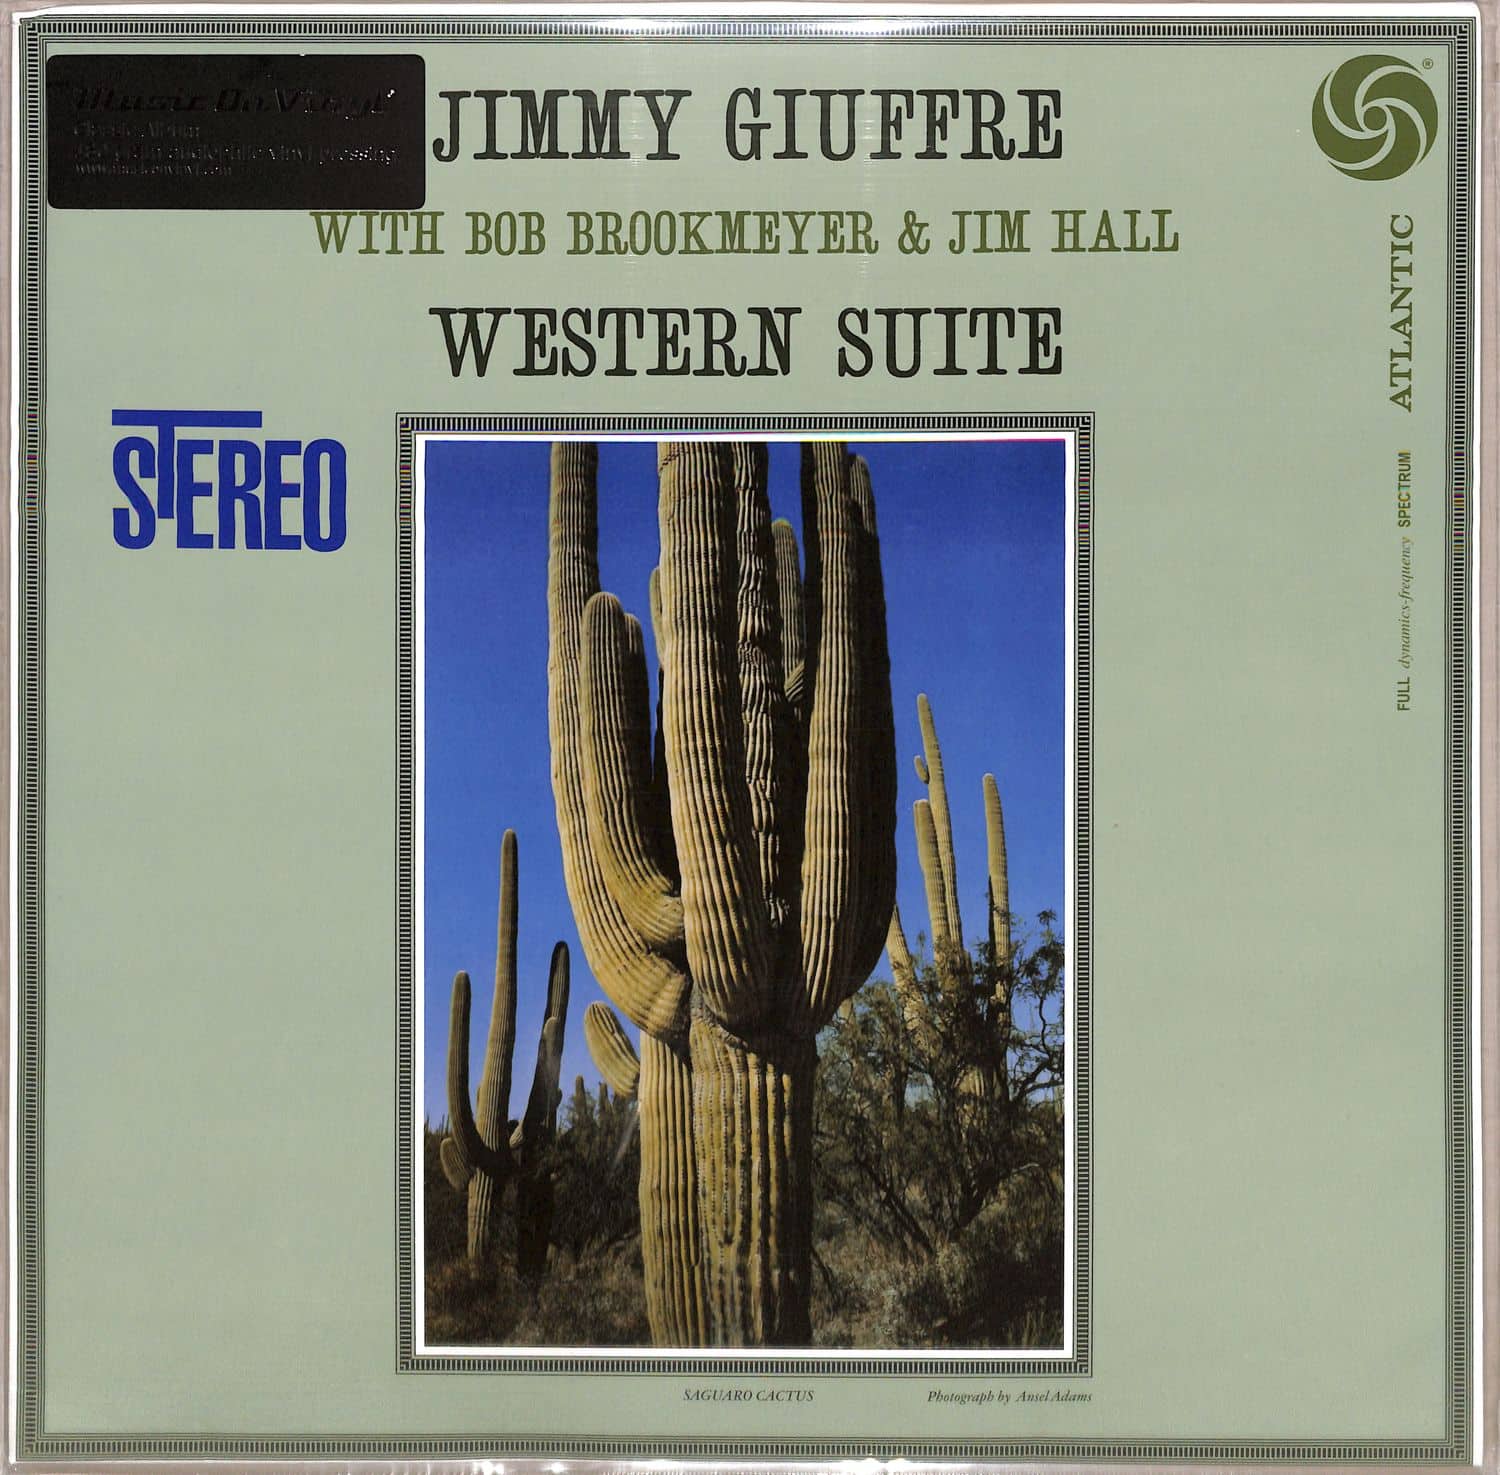 Jimmy Giuffre - WESTERN SUITE 